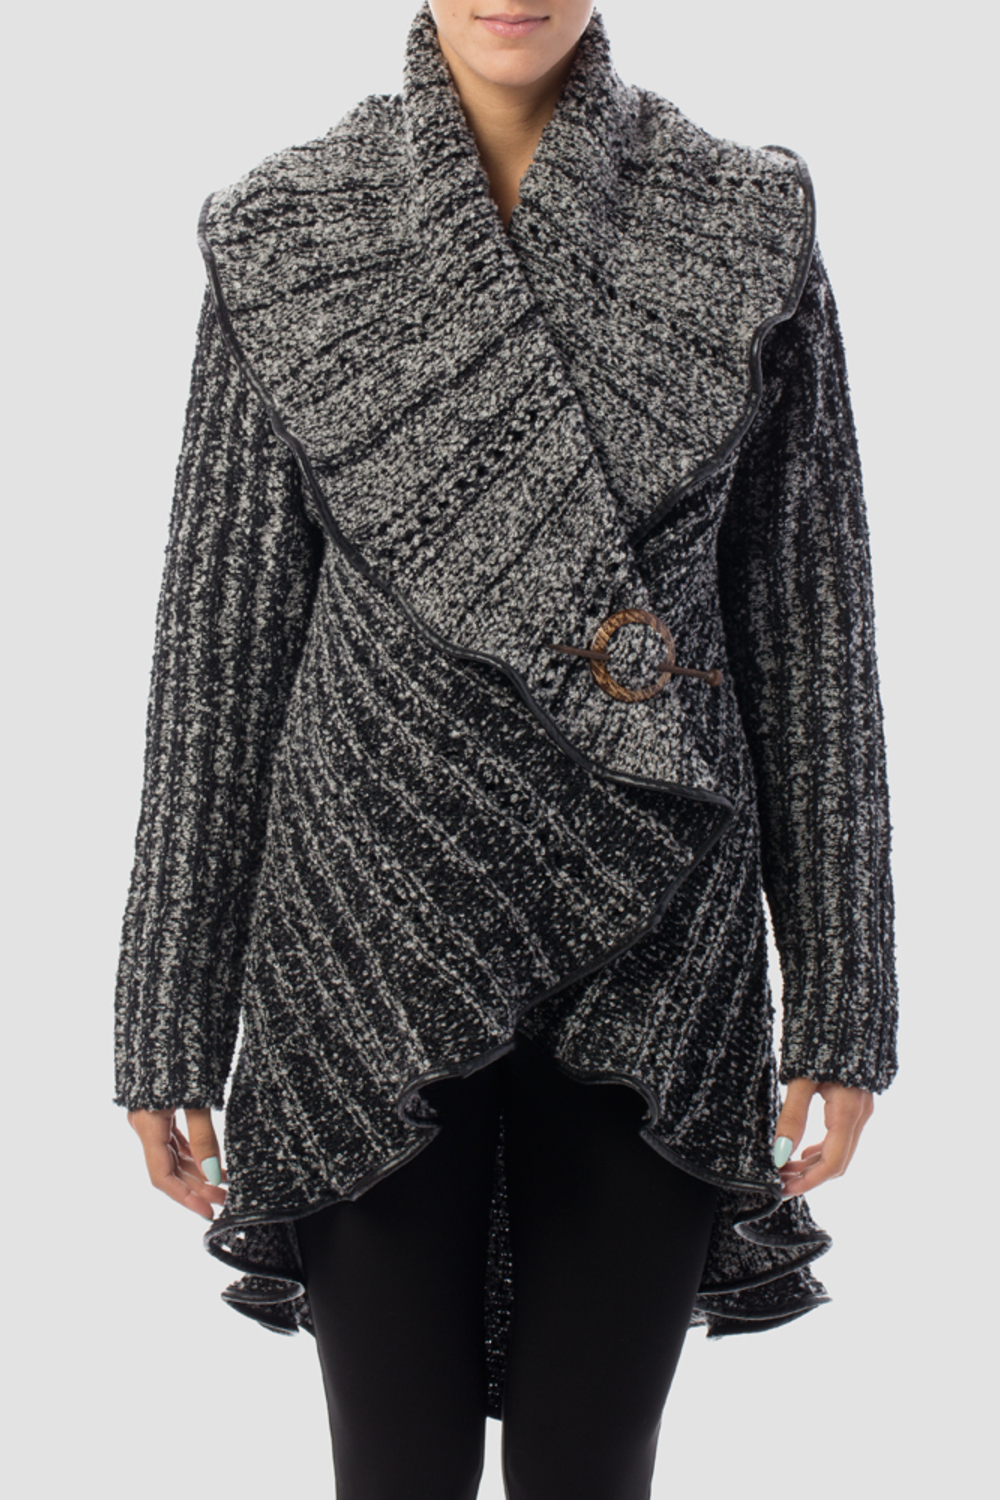 Joseph Ribkoff cover up style 154991. Charcoal